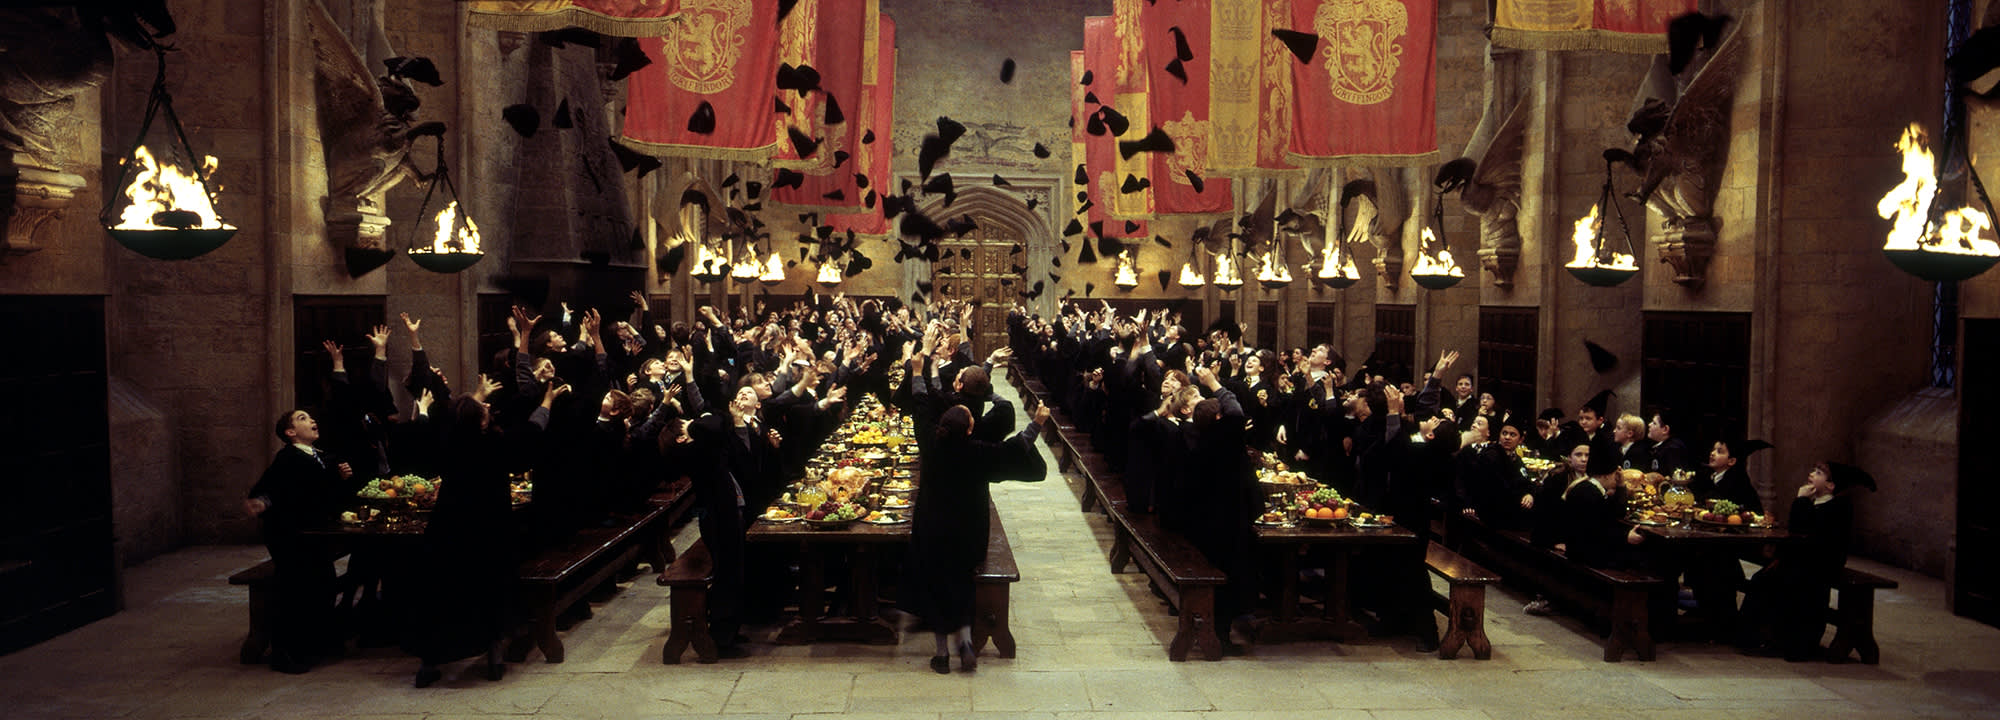 HP-F1-philosophers-stone-great-hall-end-of-year-feast-gryffindor-win-web-landscape